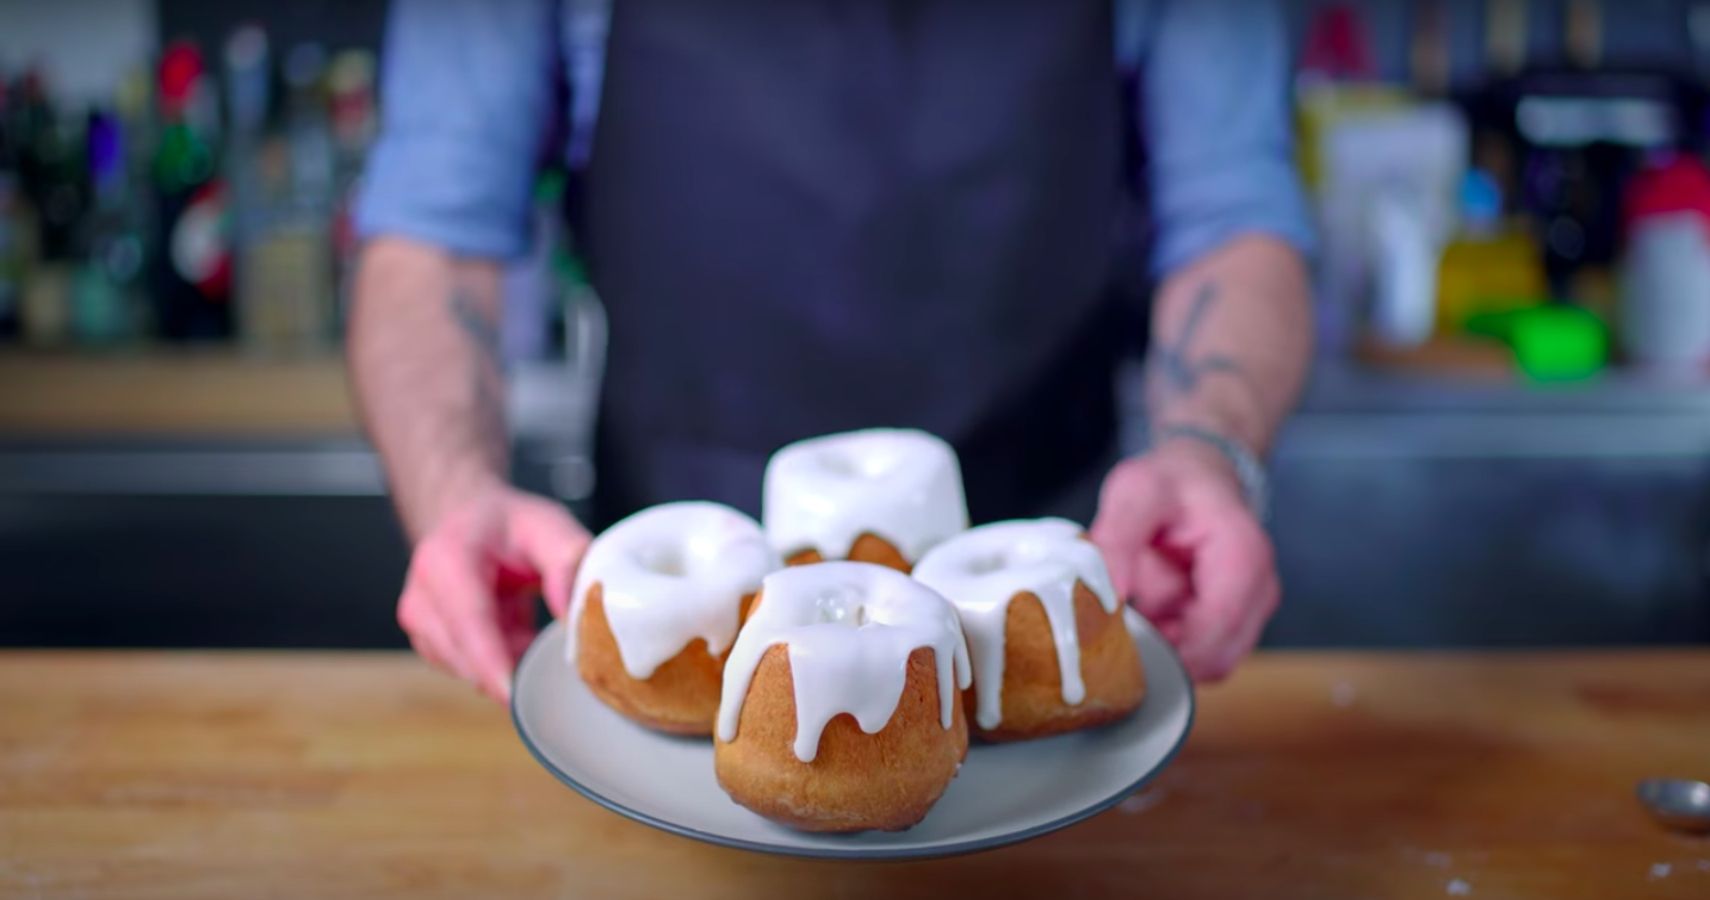 Finally Learn How To Make Skyrims Sweetrolls The Proper Way